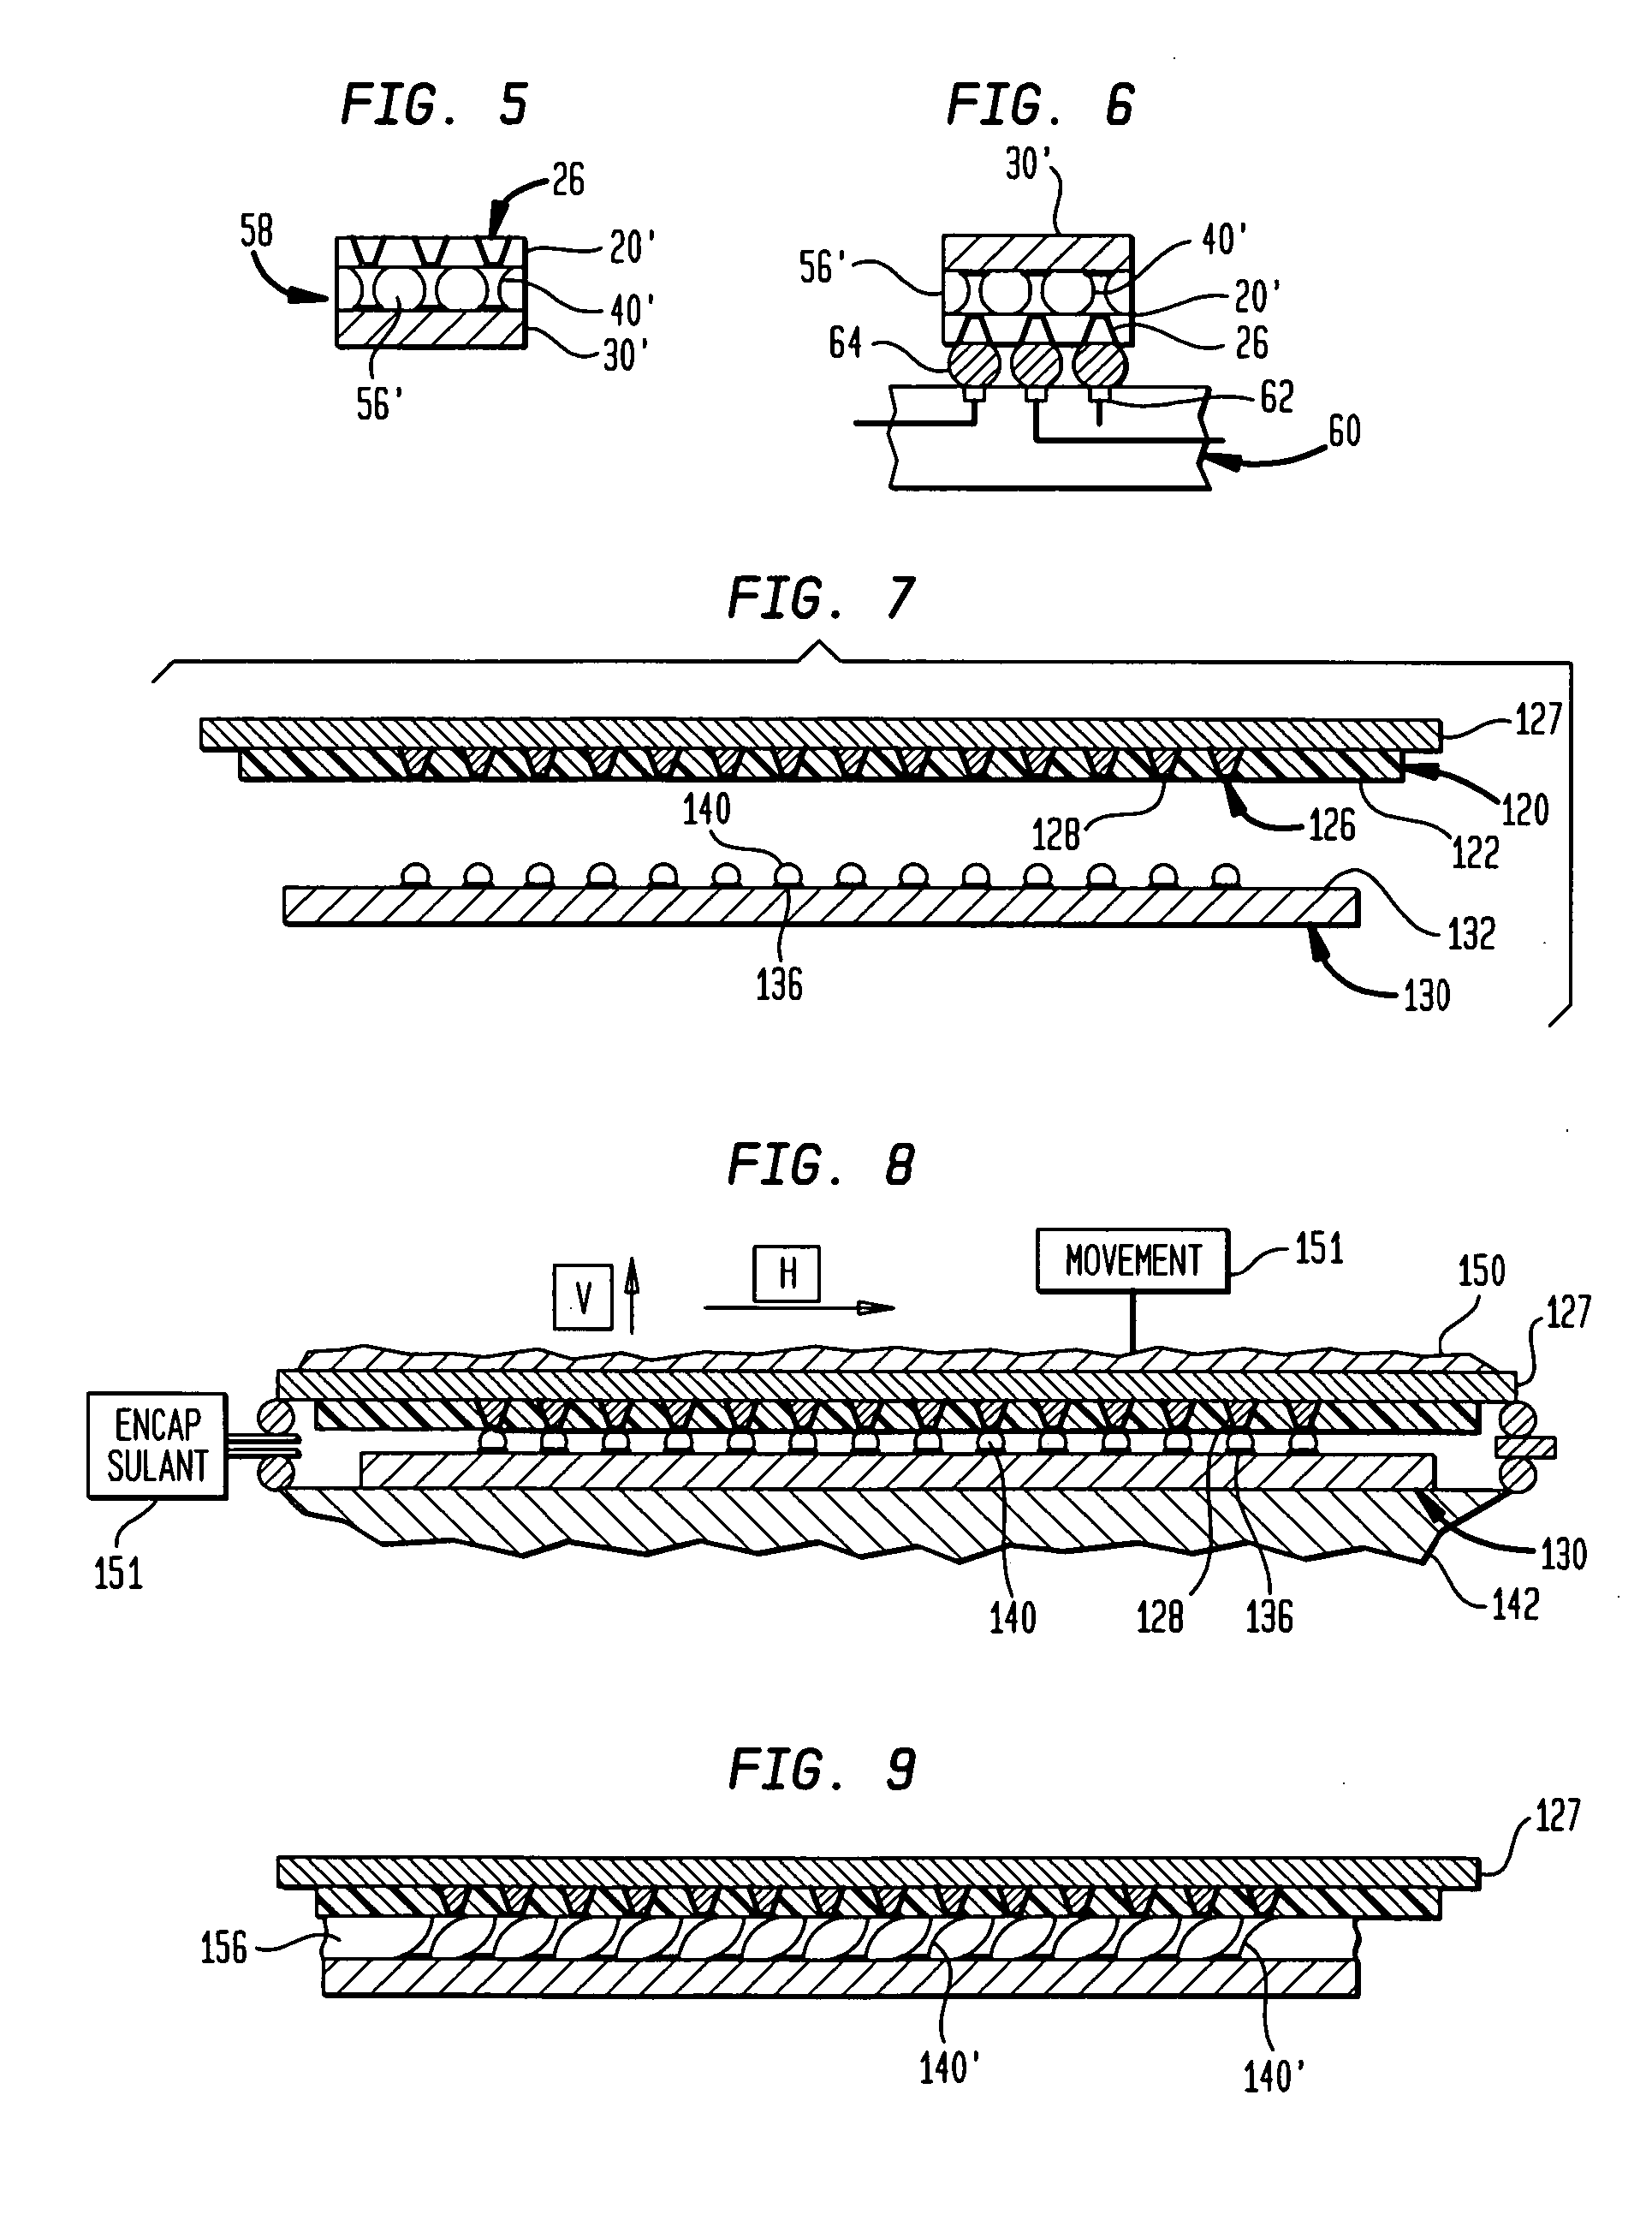 Microelectronic packages with solder interconnections